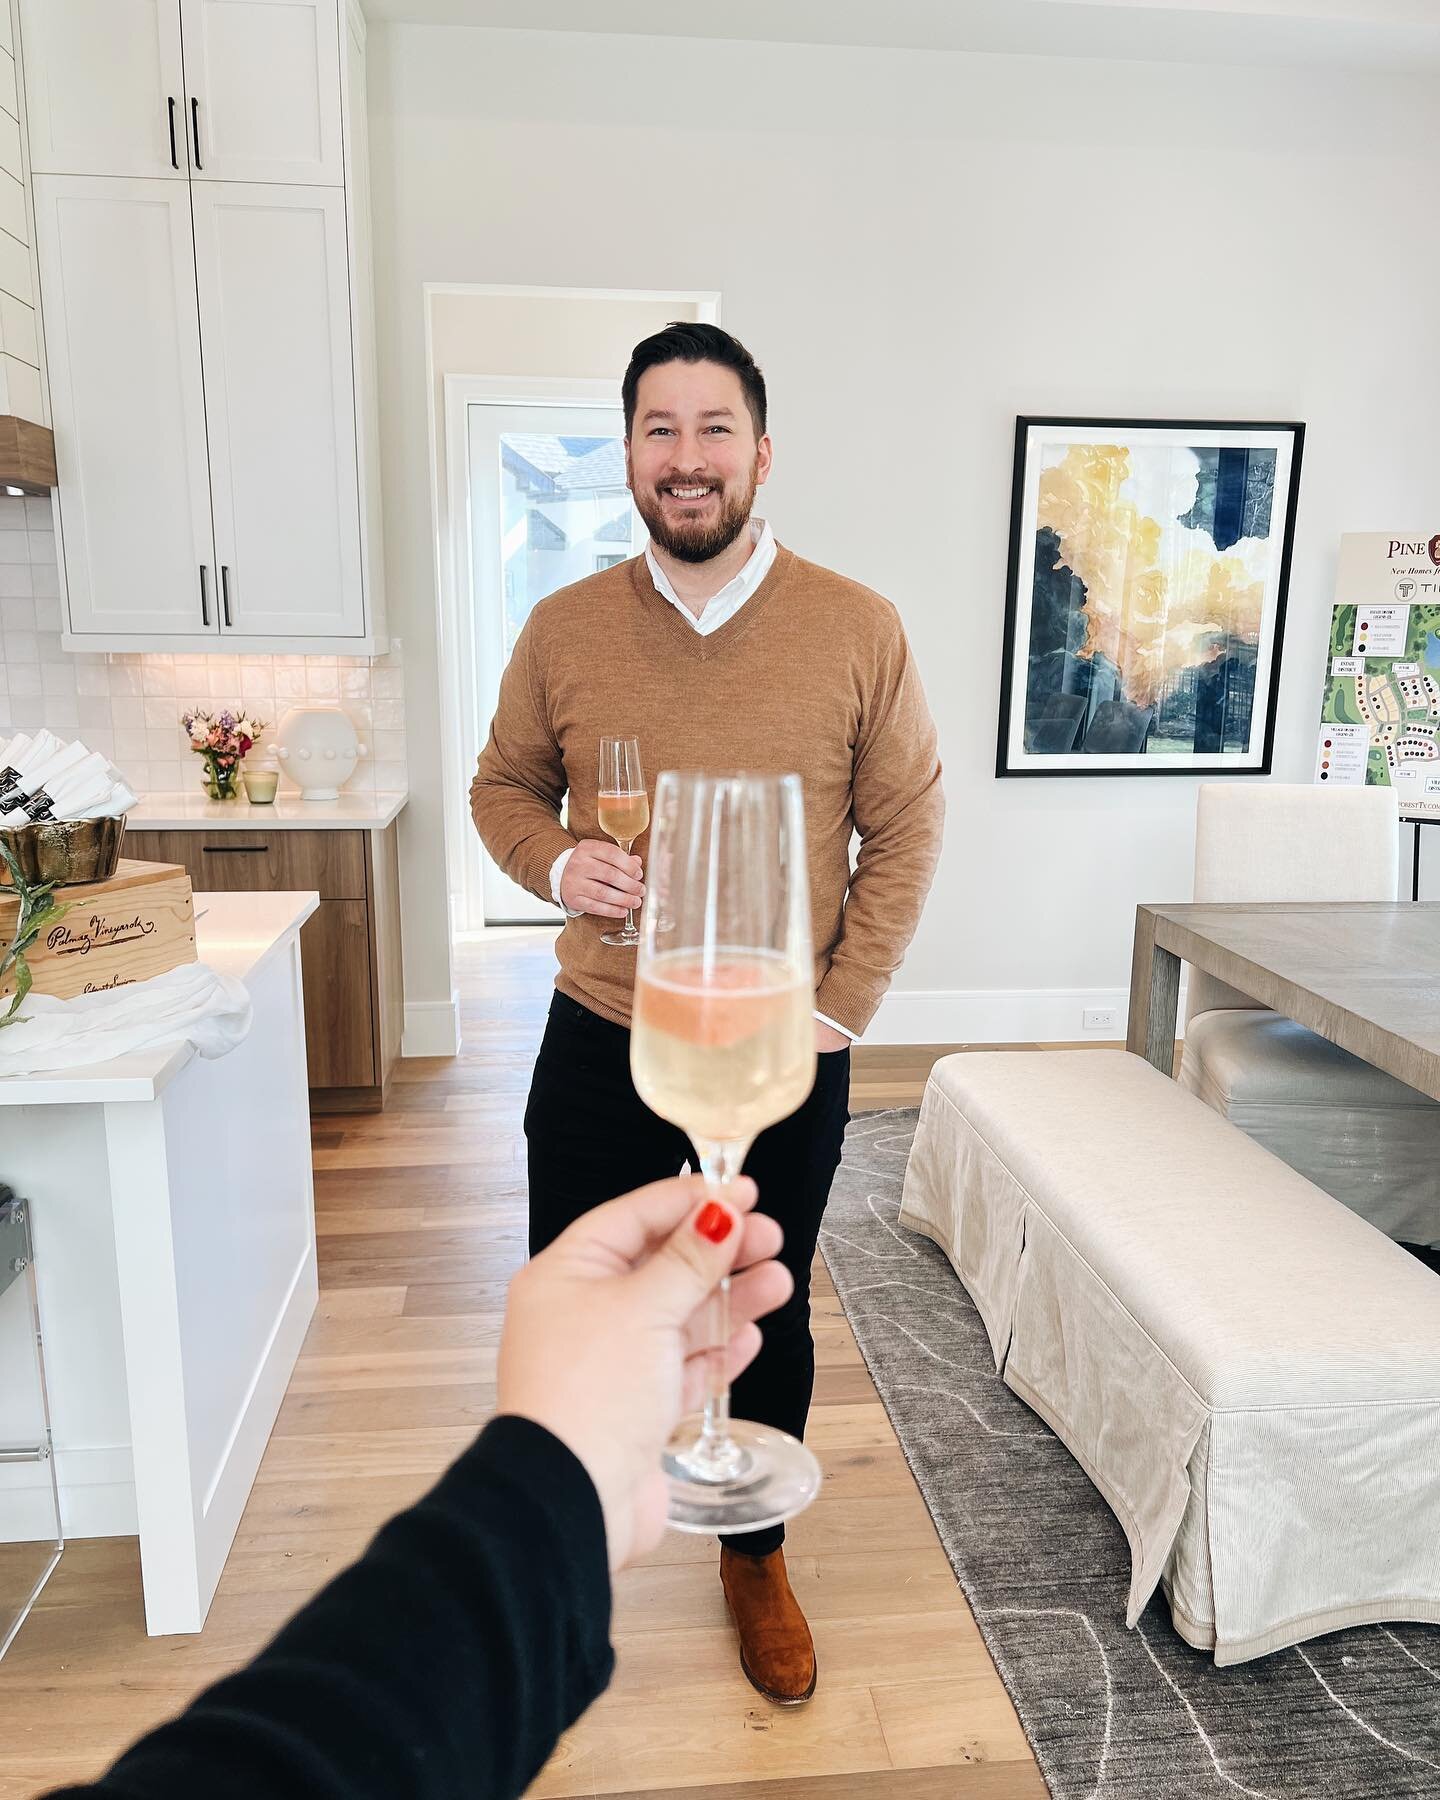 ✨Cheers to the weekend!✨ We&rsquo;re working on getting everything ready for open houses this weekend.

🌳 Stay tuned to see the new properties hitting the market today.

As always, we&rsquo;re here for any of your real estate needs. DM with any ques